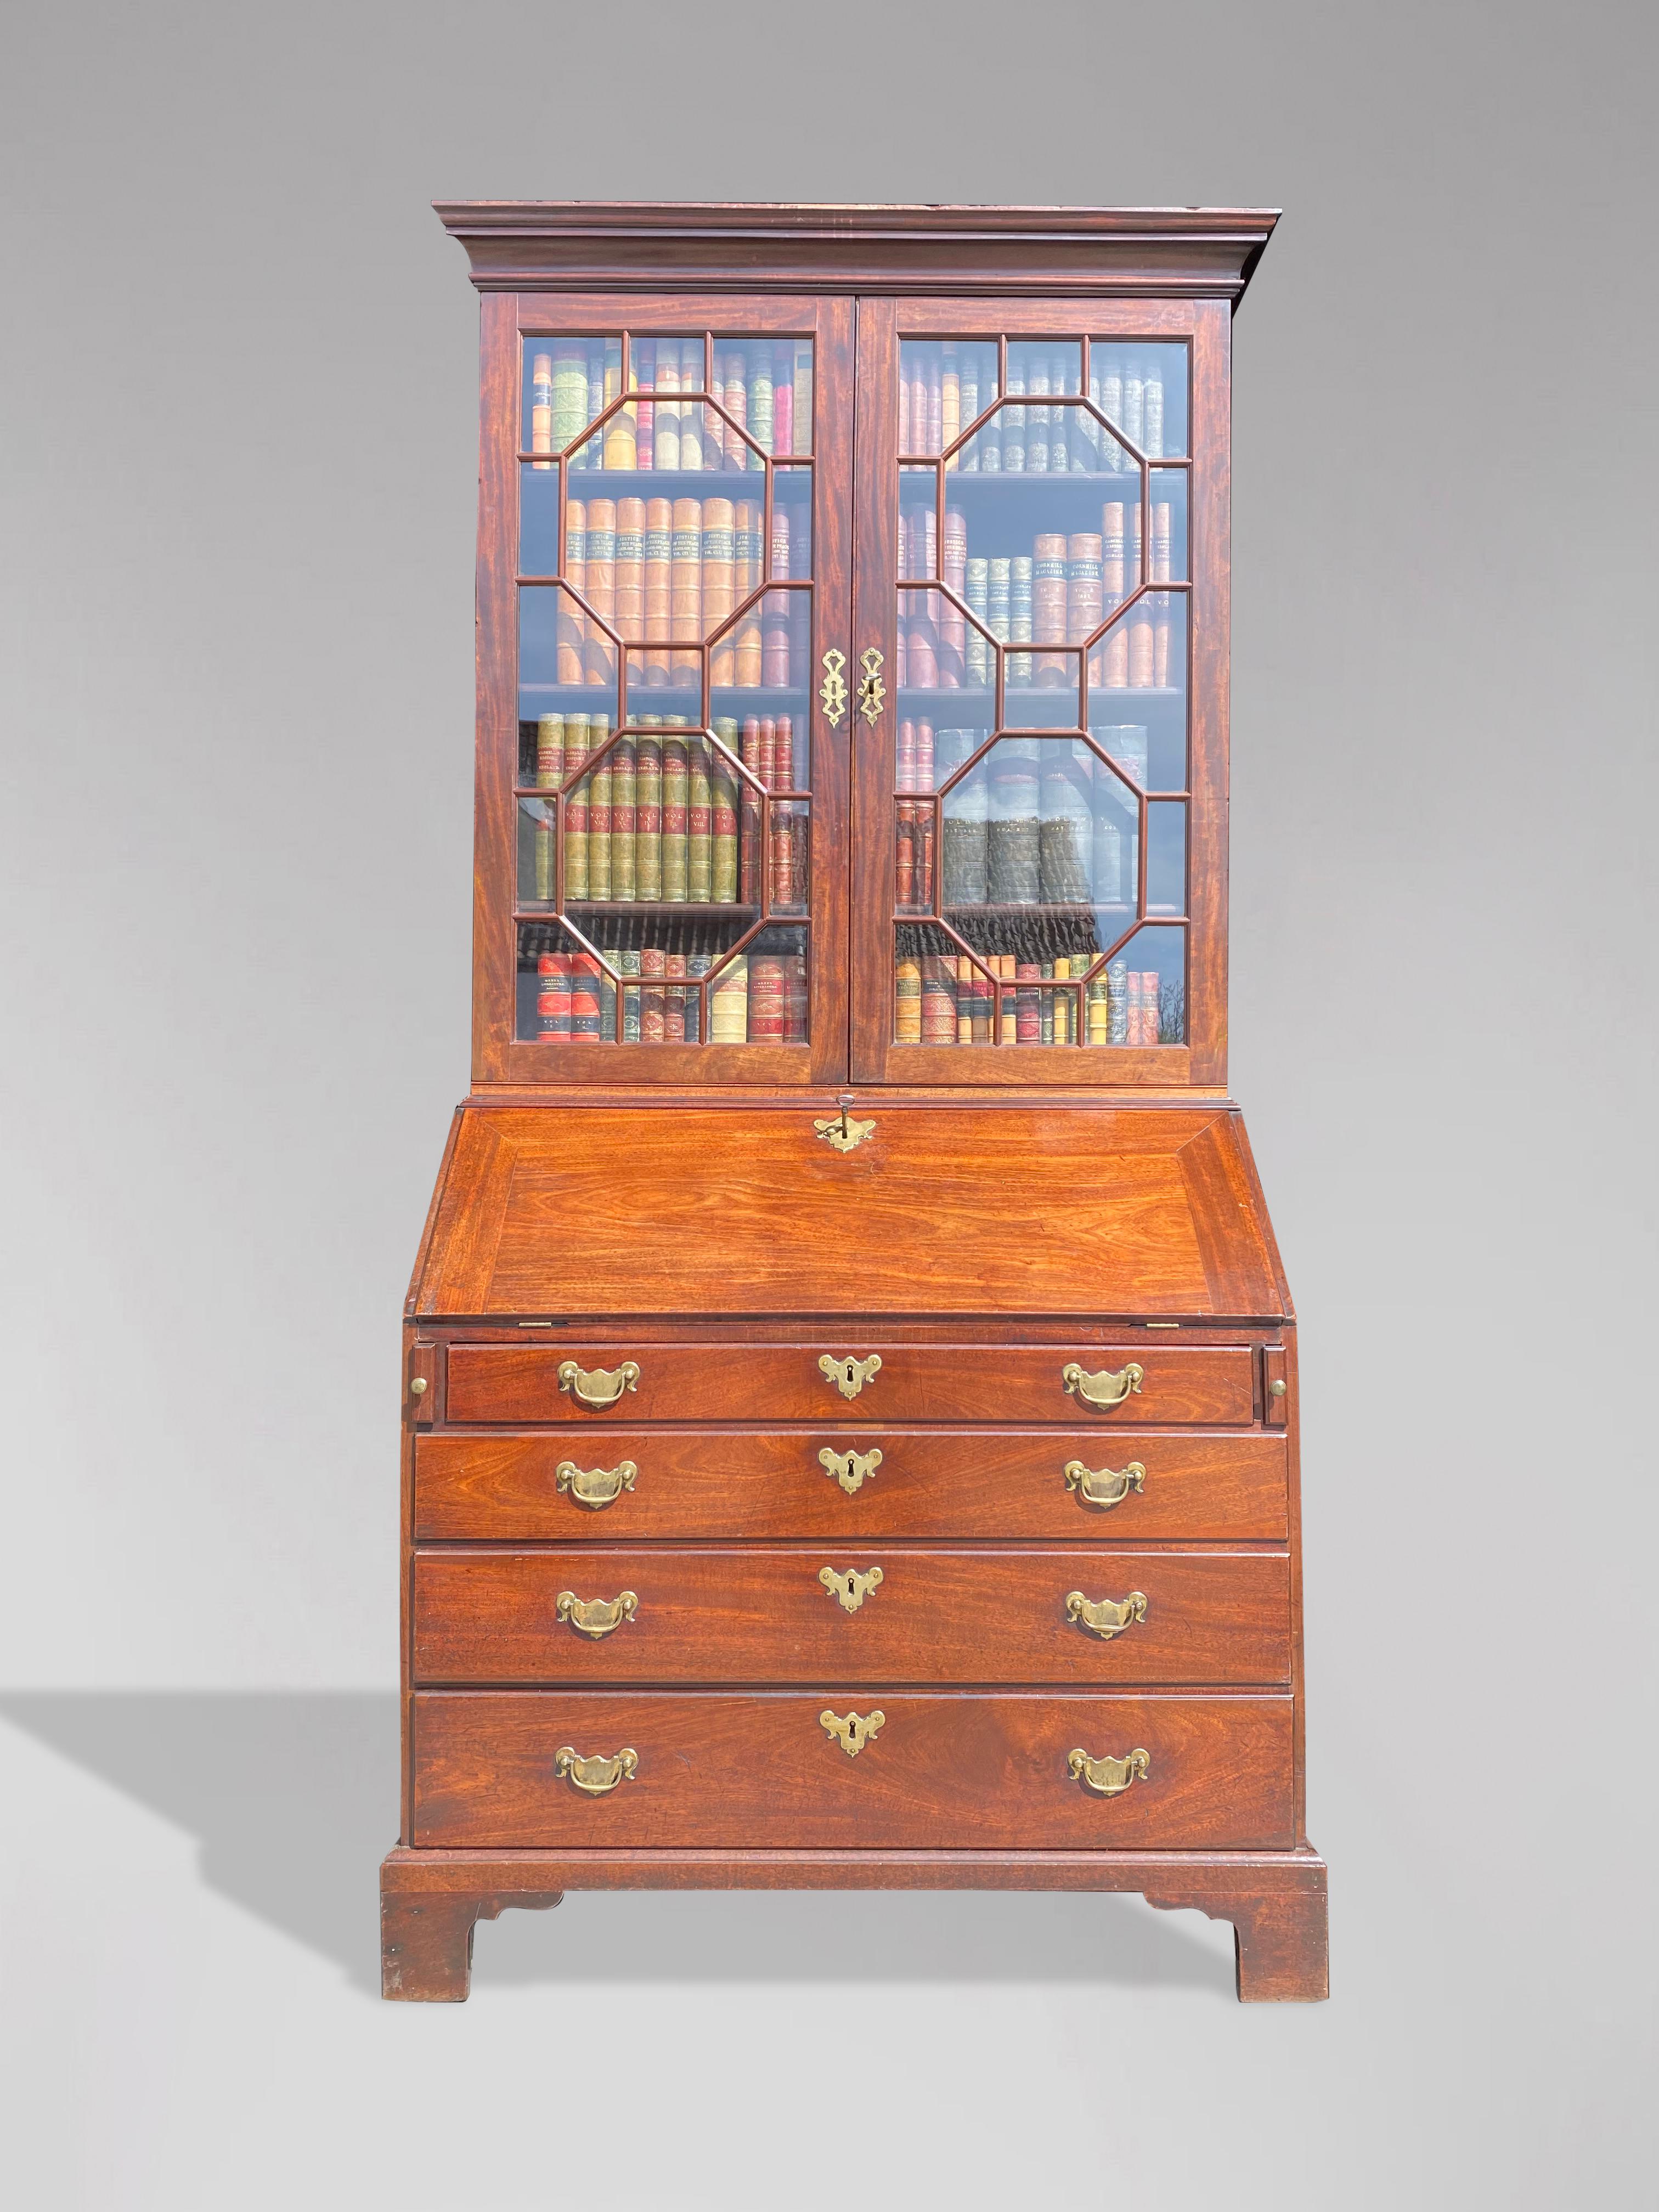 A stunning quality 18th century, George III period mahogany bureau bookcase retaining the original patina. Well proportioned mahogany bookcase with moulded cornice above a pair of astragal glazing doors enclosing three adjustable shelves. The flamed